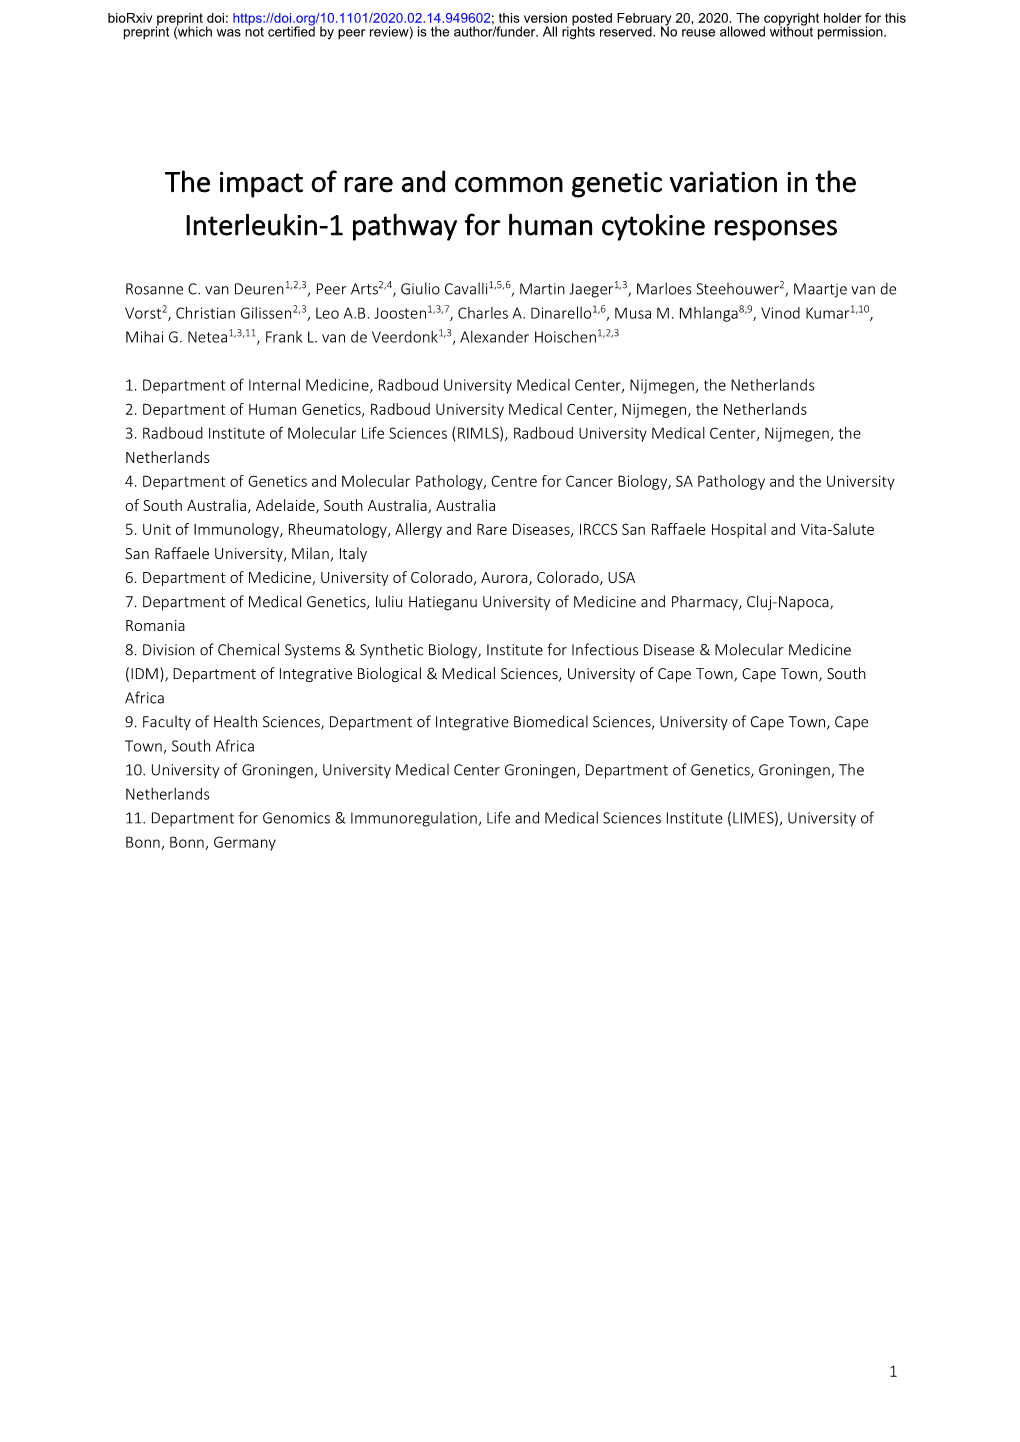 The Impact of Rare and Common Genetic Variation in the Interleukin-1 Pathway for Human Cytokine Responses